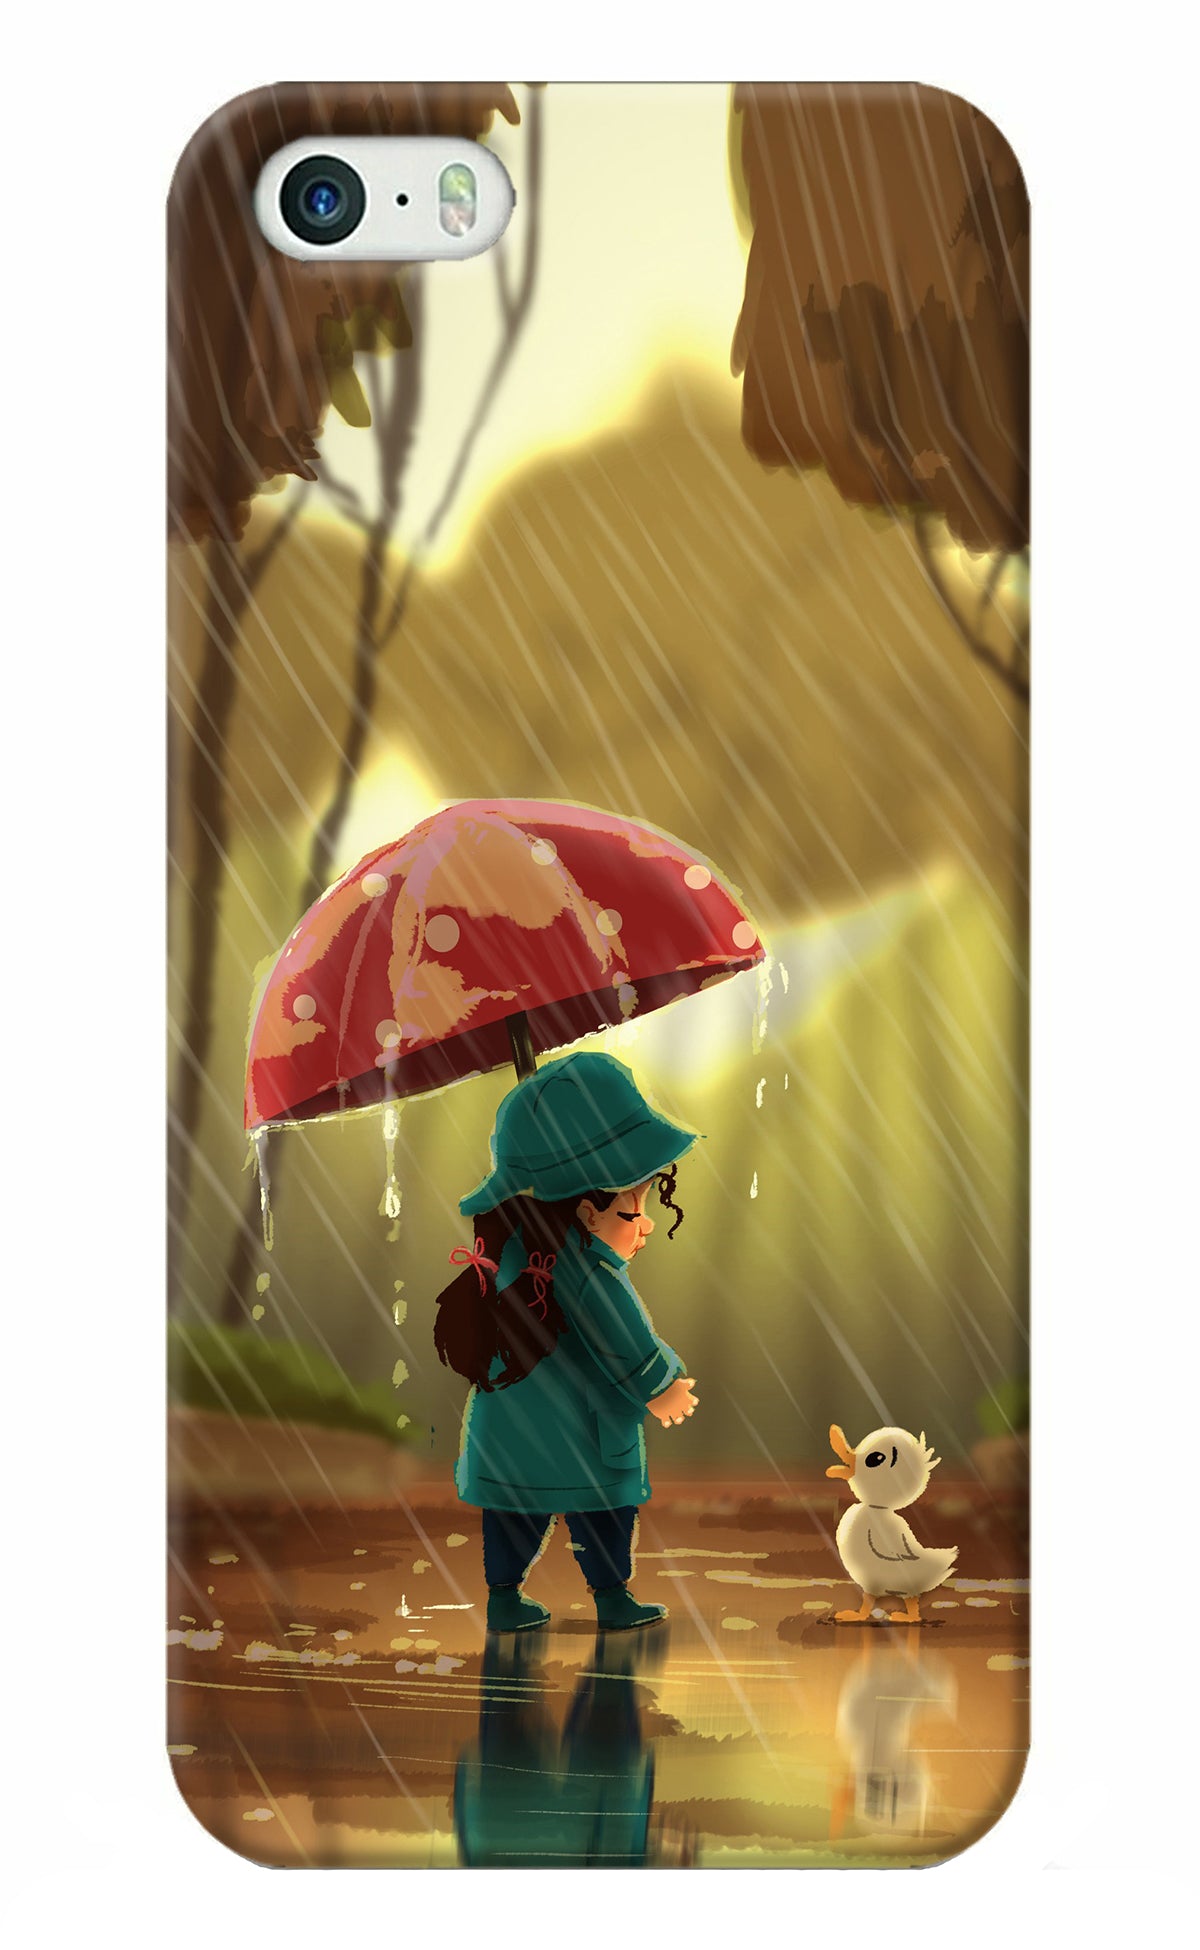 Rainy Day iPhone 5/5s Back Cover